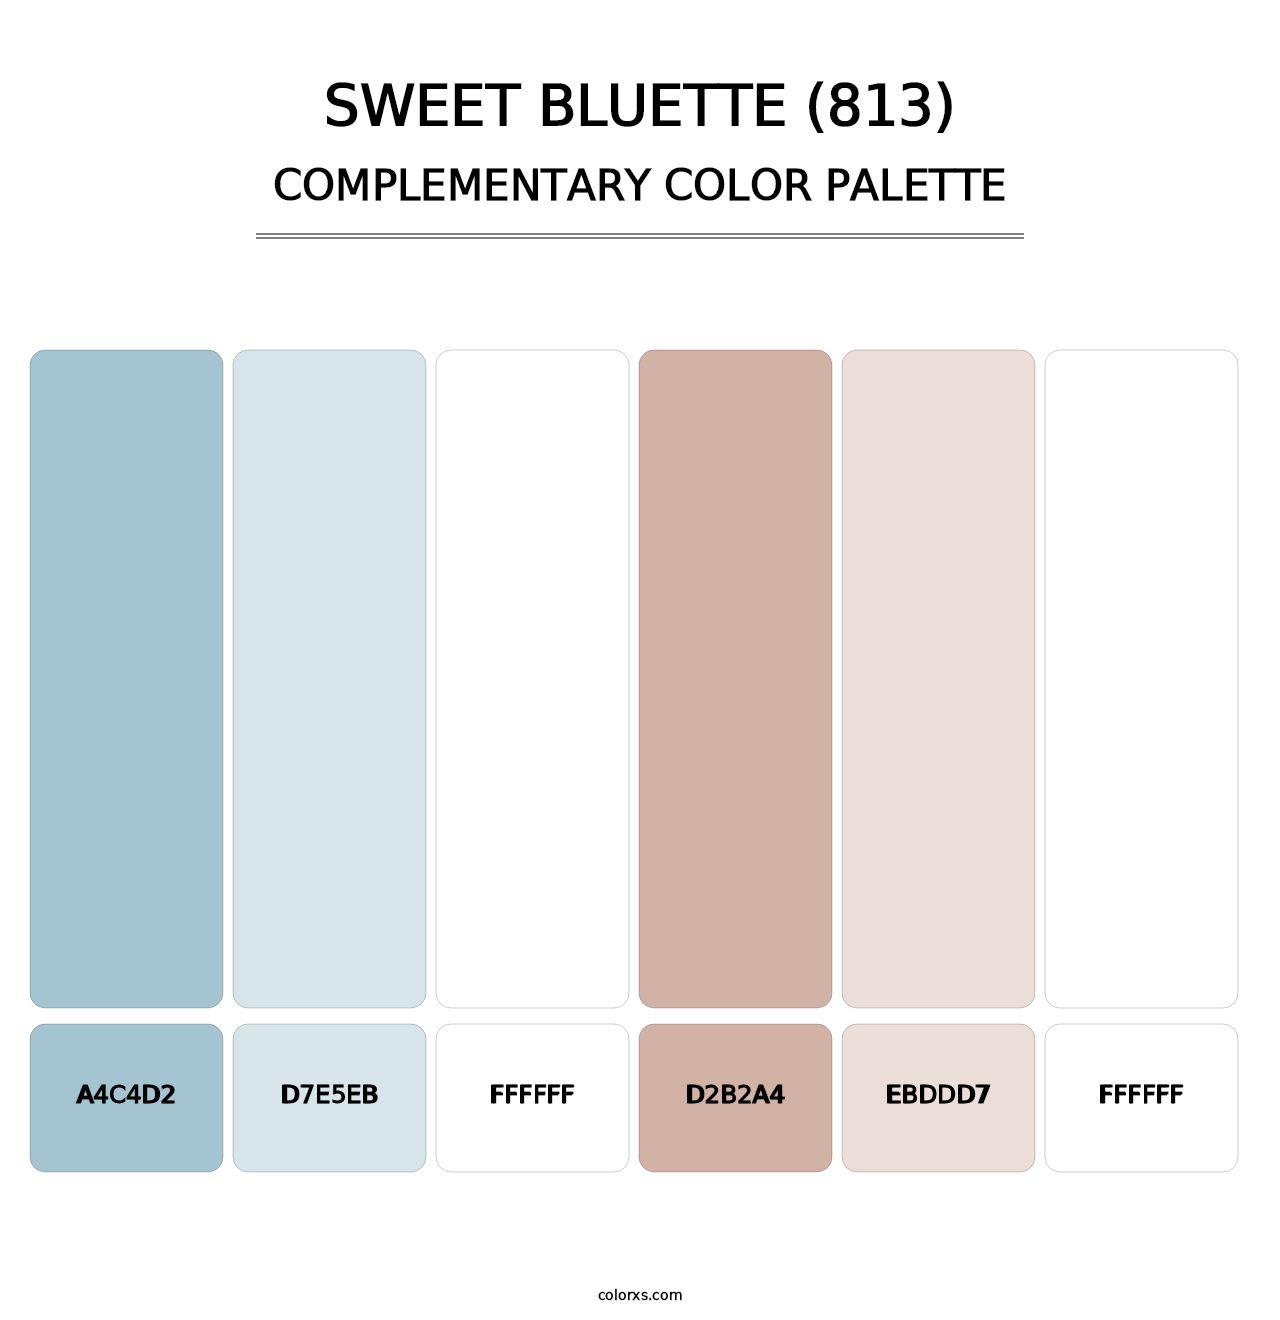 Sweet Bluette (813) - Complementary Color Palette